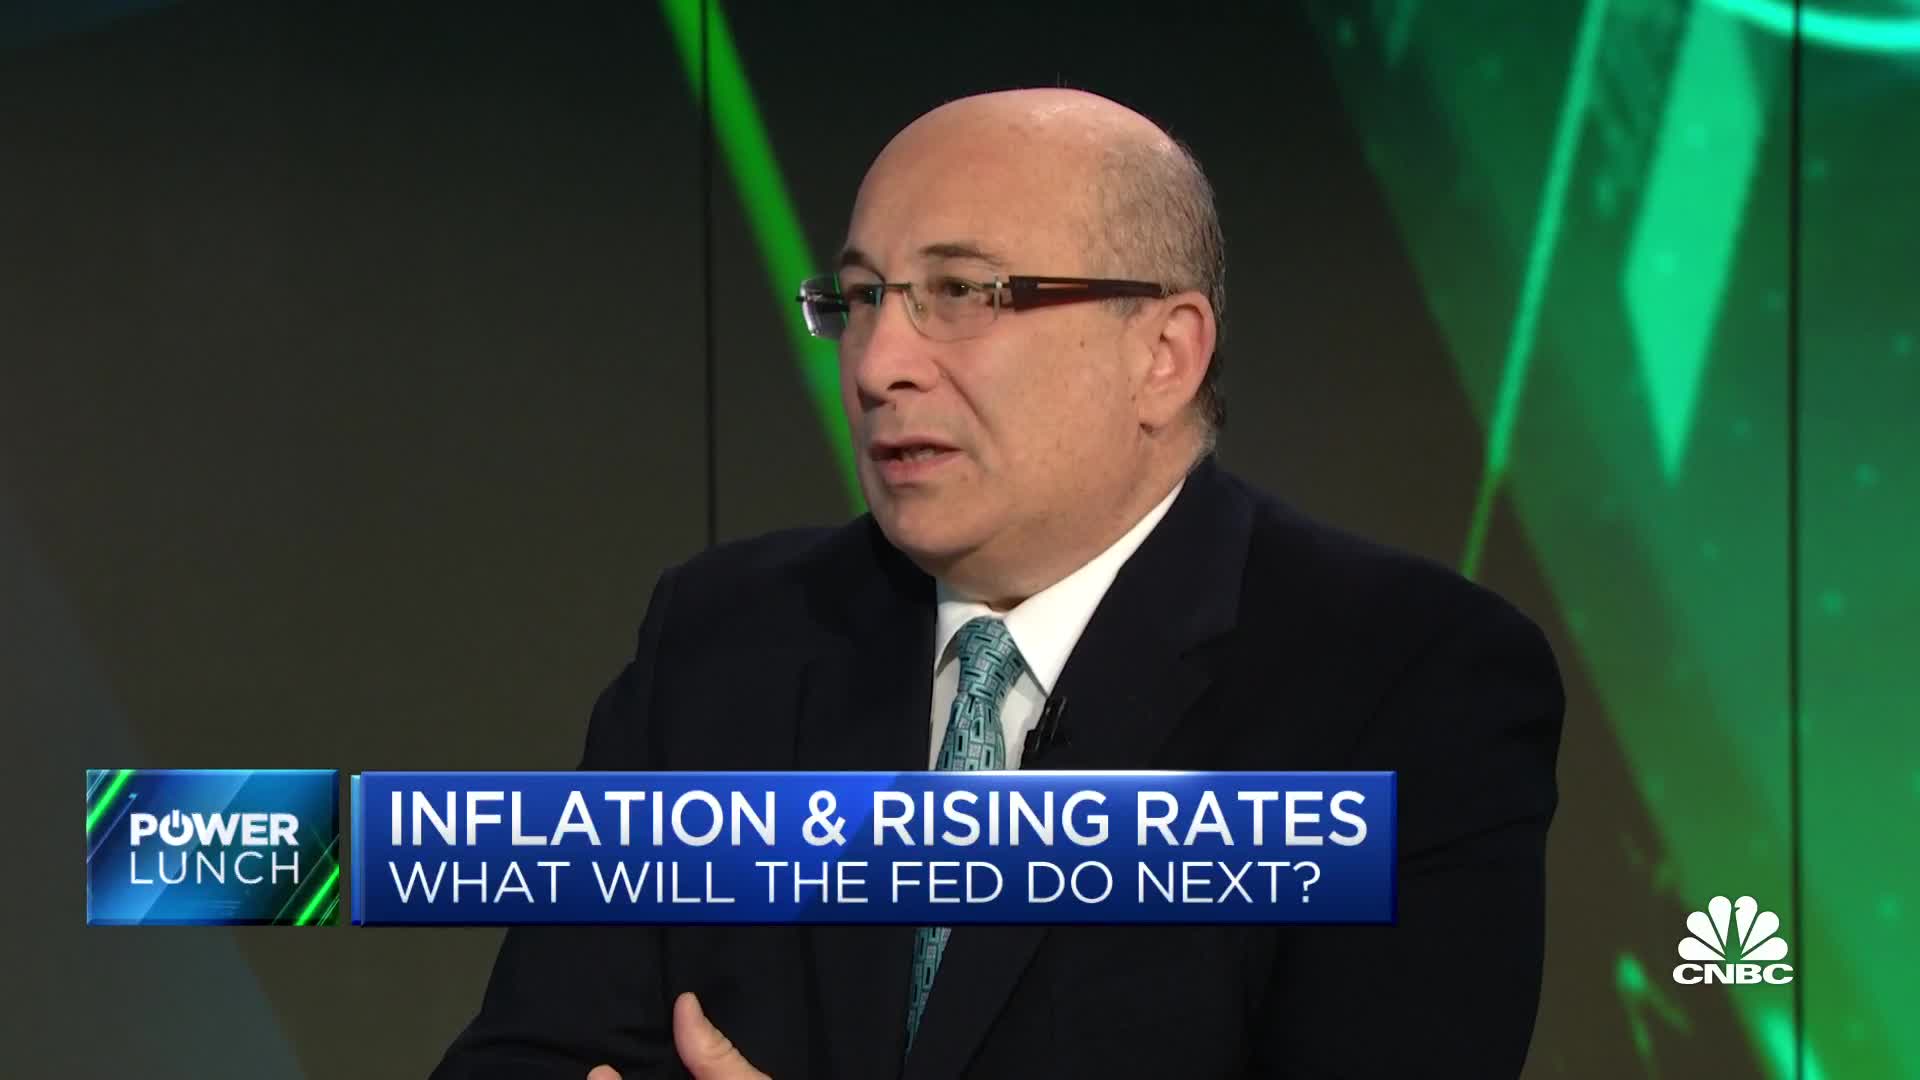 The last six months, we've seen inflation come down consistently by every measure, says Contrast Capital's Insana